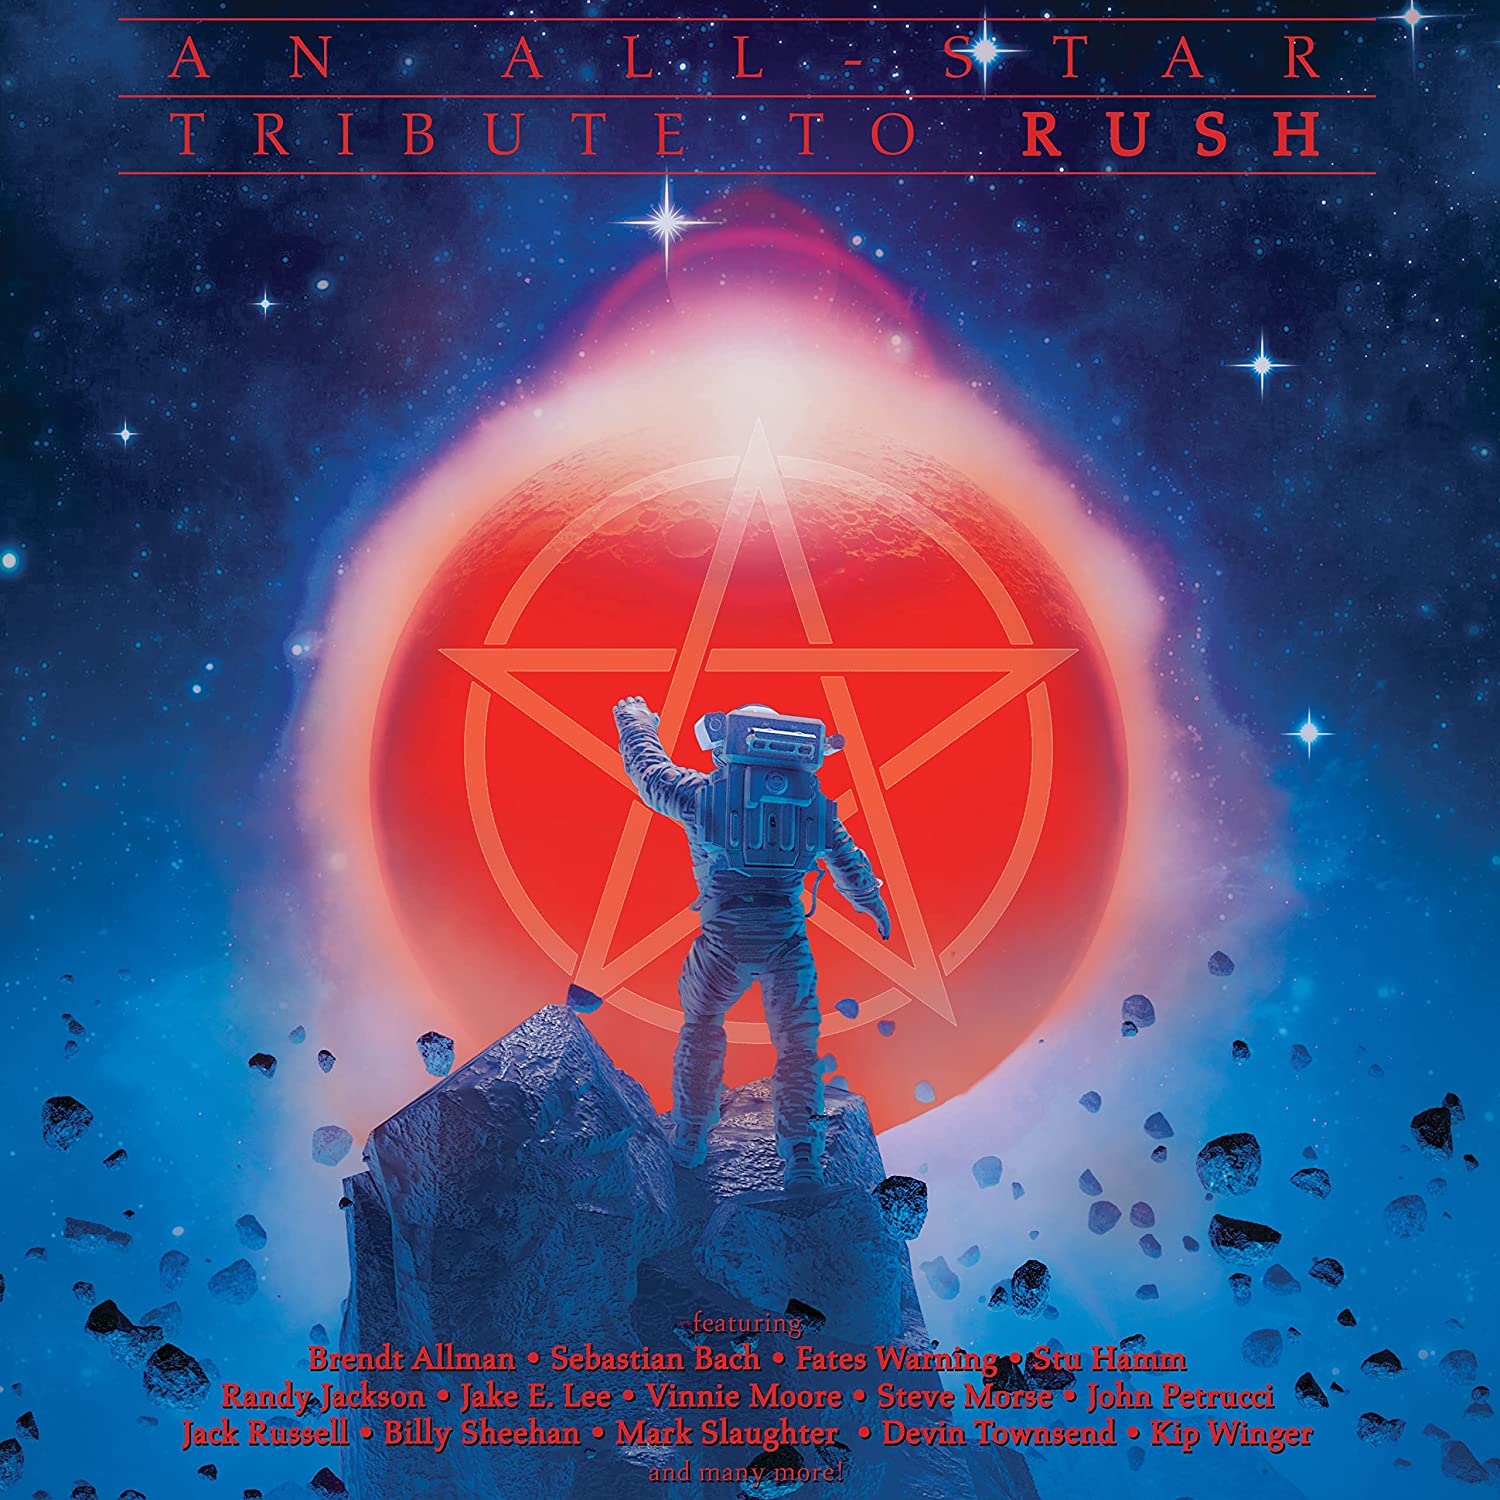 Rush is a Band Blog: All-Star Tribute To Rush featuring members of